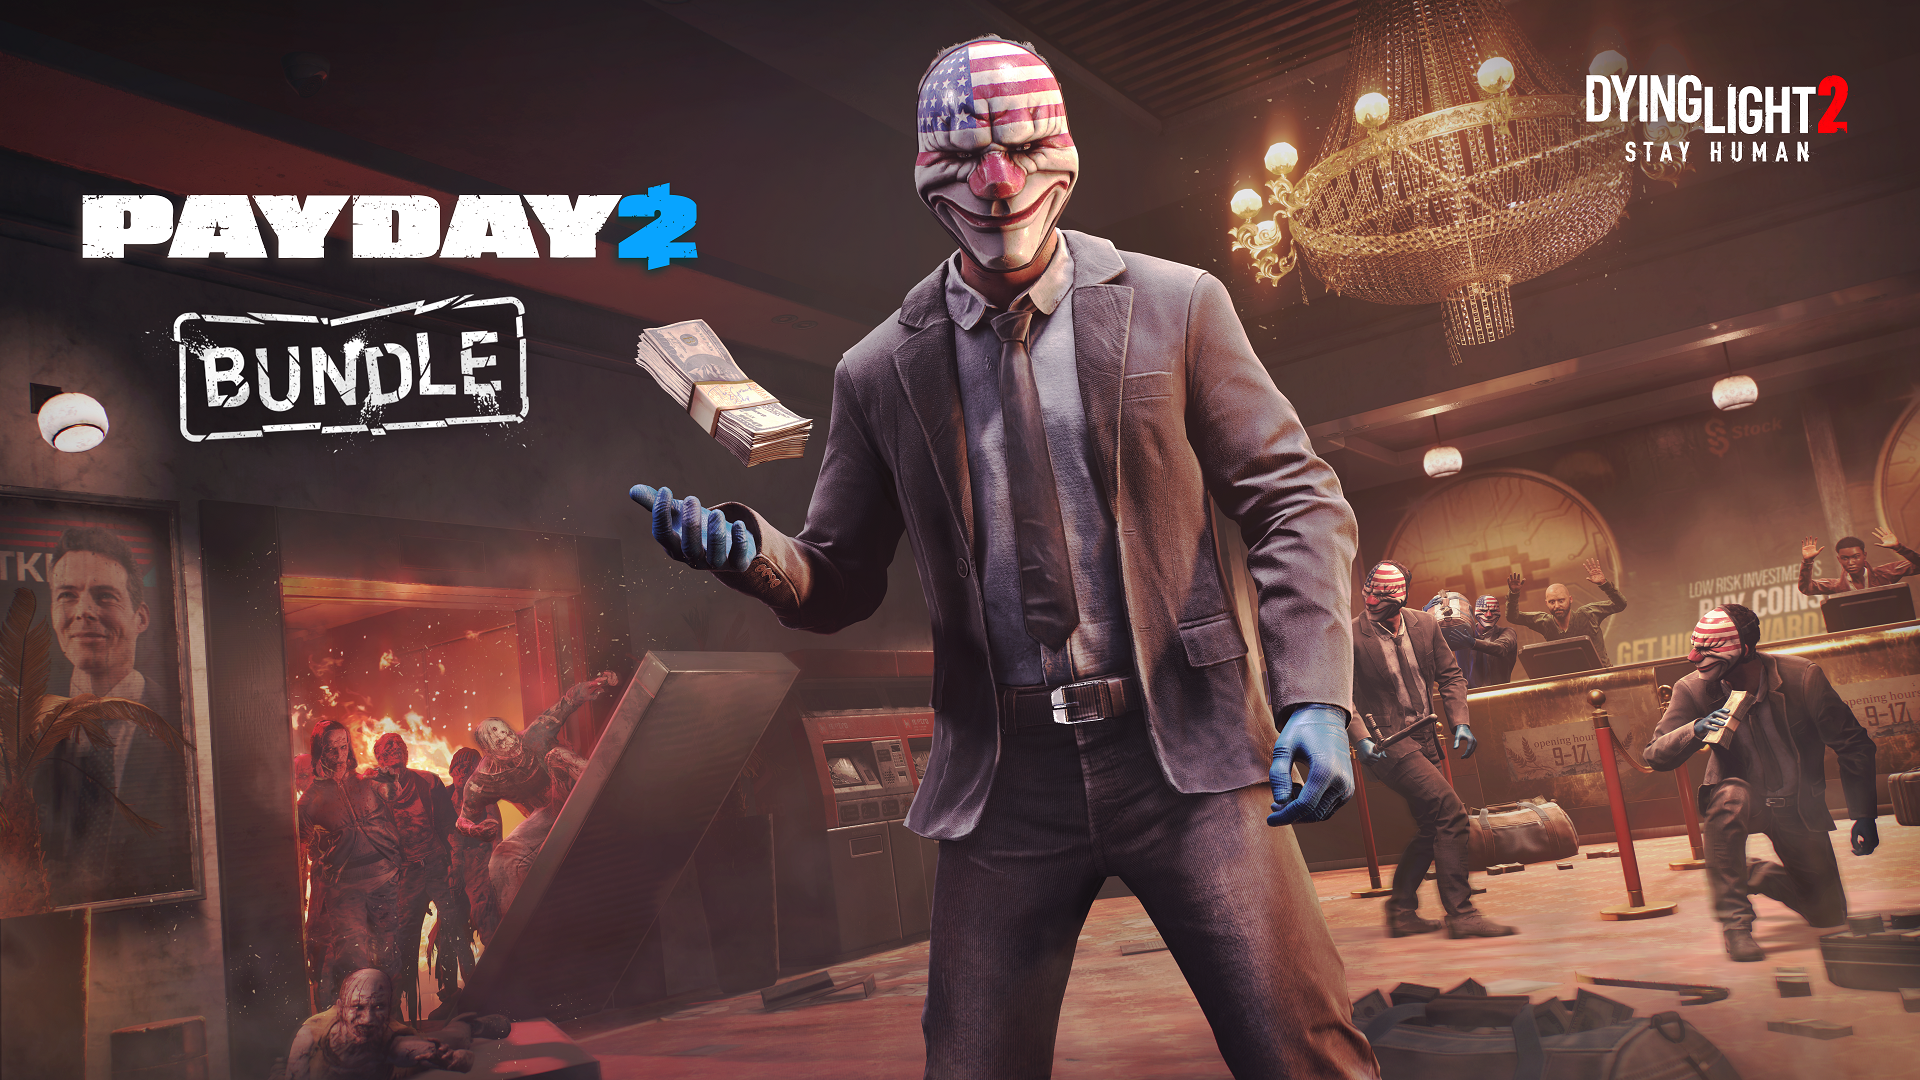 Payday 2 Dying Light 2